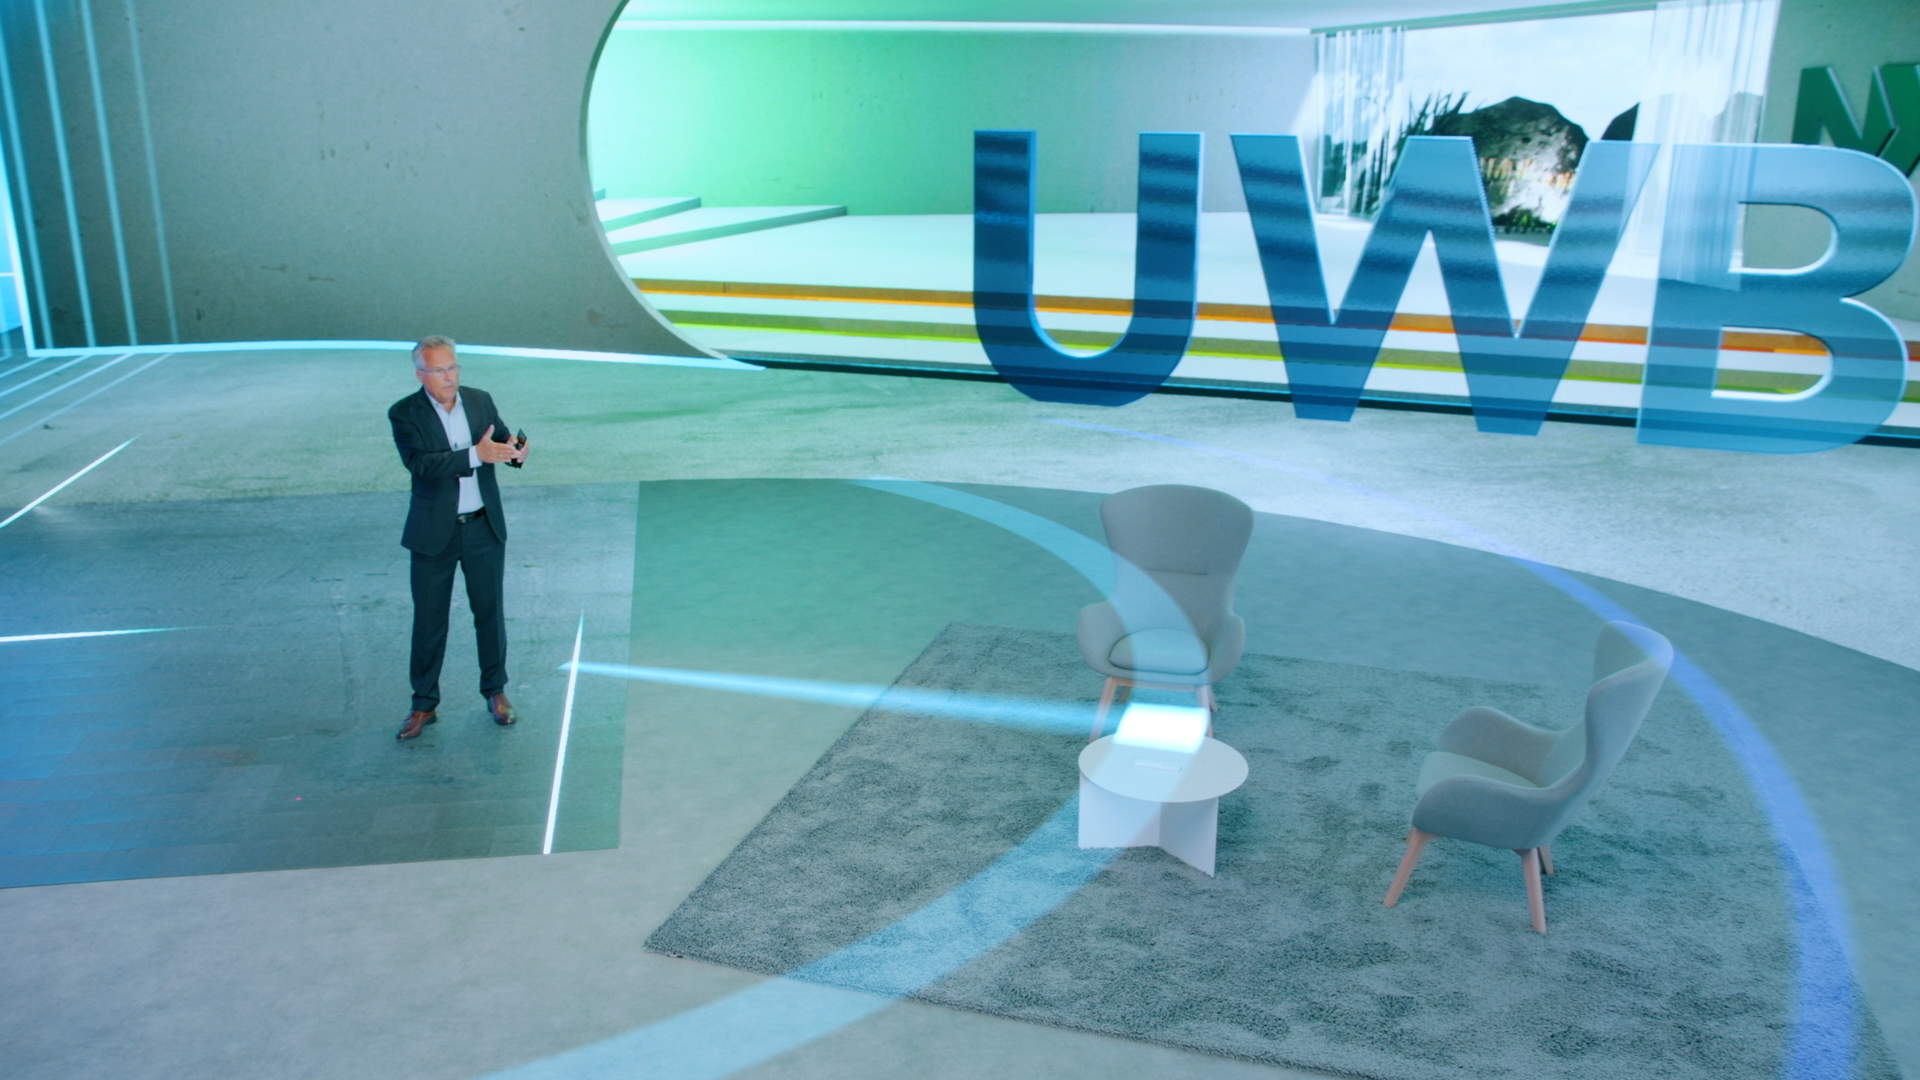 NXP CEO, Kurt Sievers, demonstrates how ultra-wideband technology precisely tracks objects at NXP Connects 2020